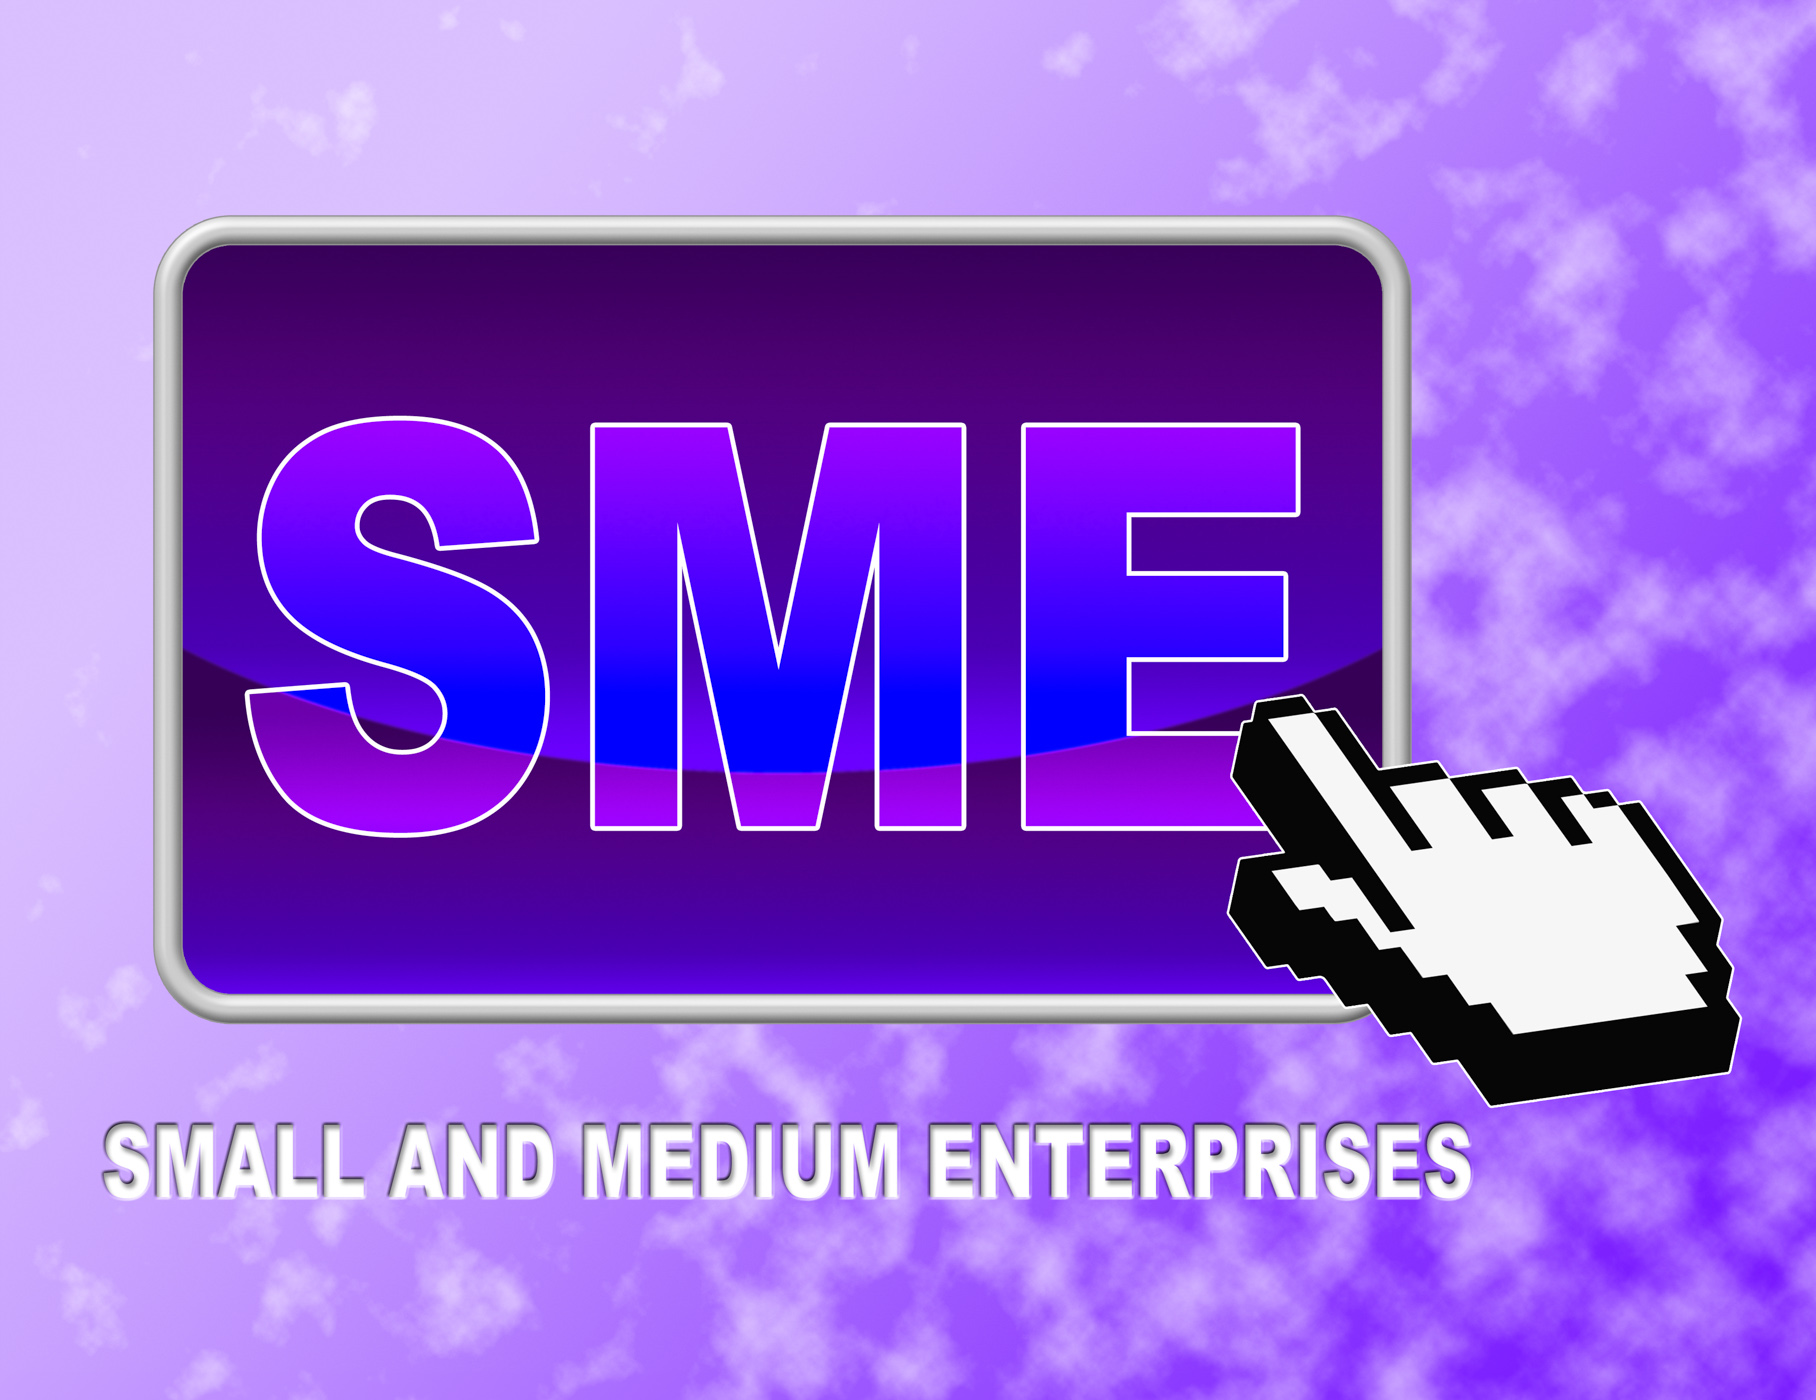 free-photo-sme-button-indicates-web-site-and-business-business